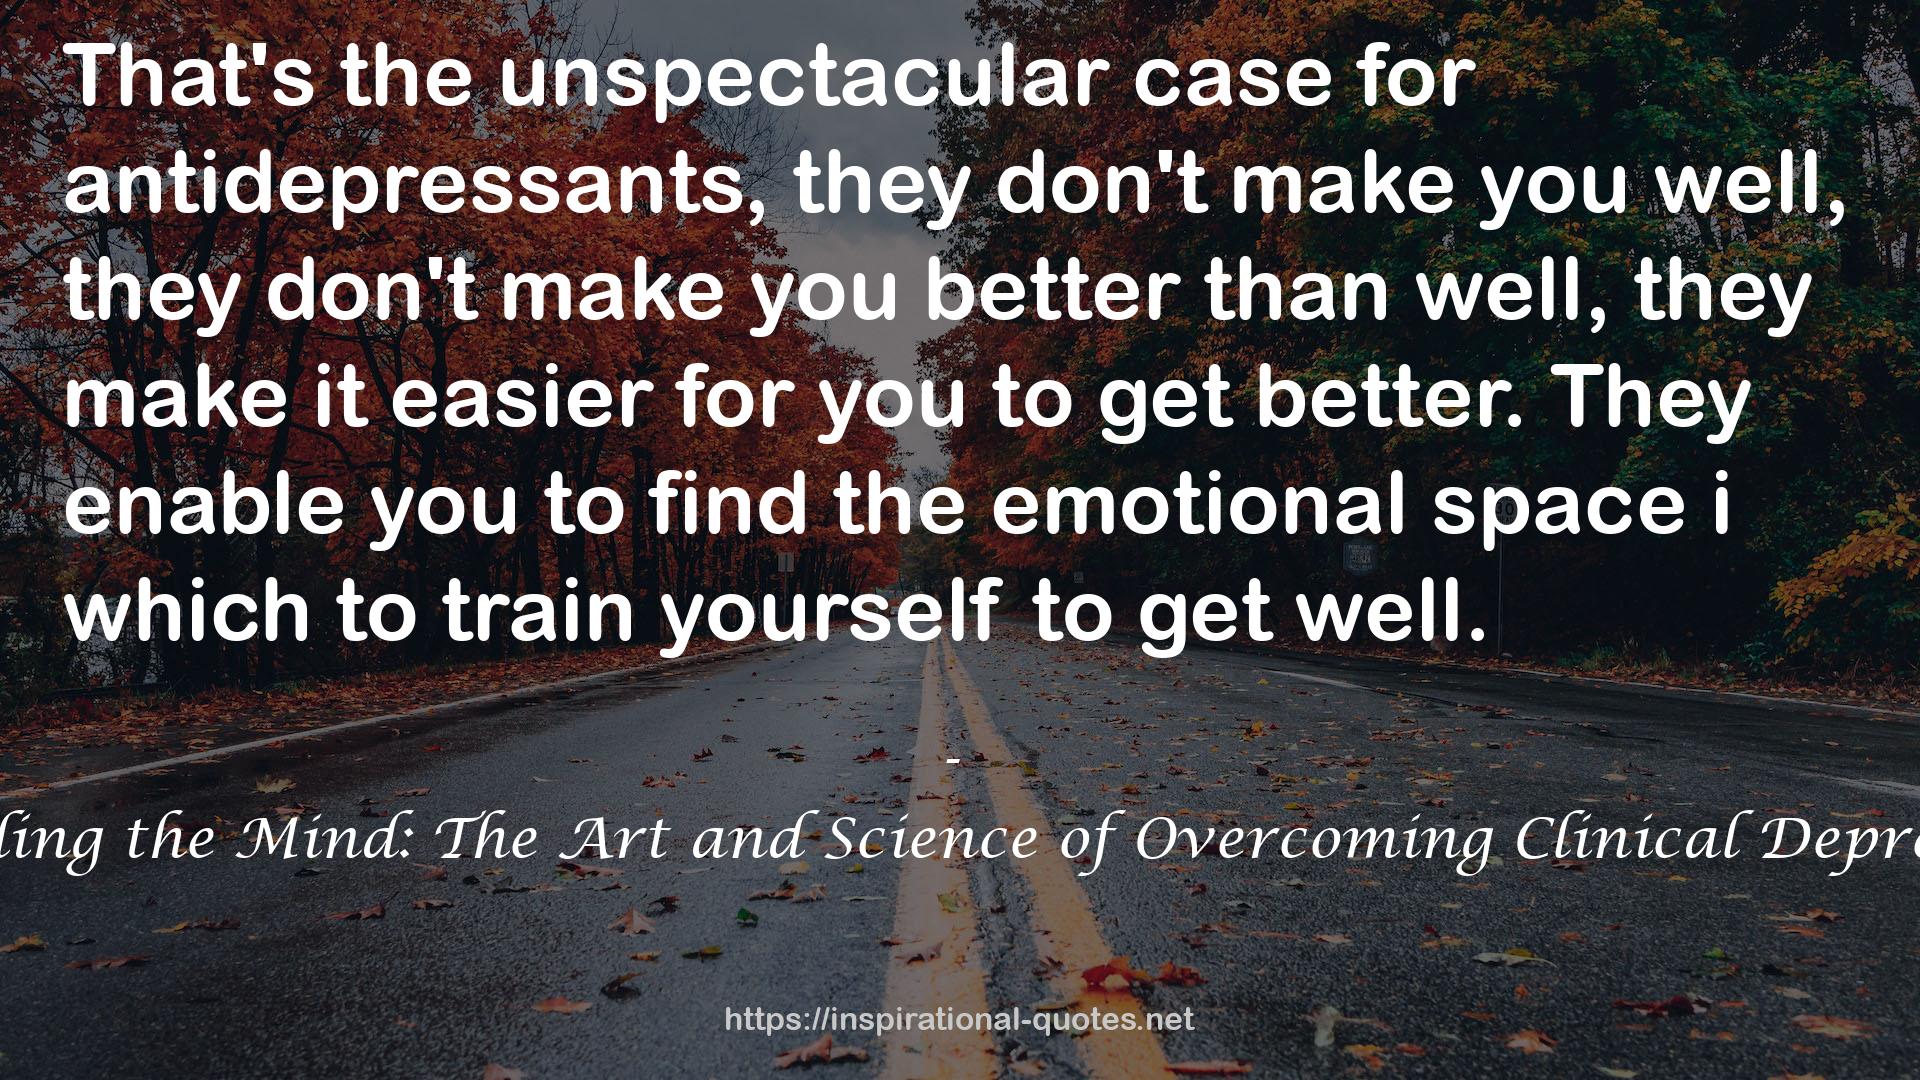 Mending the Mind: The Art and Science of Overcoming Clinical Depression QUOTES